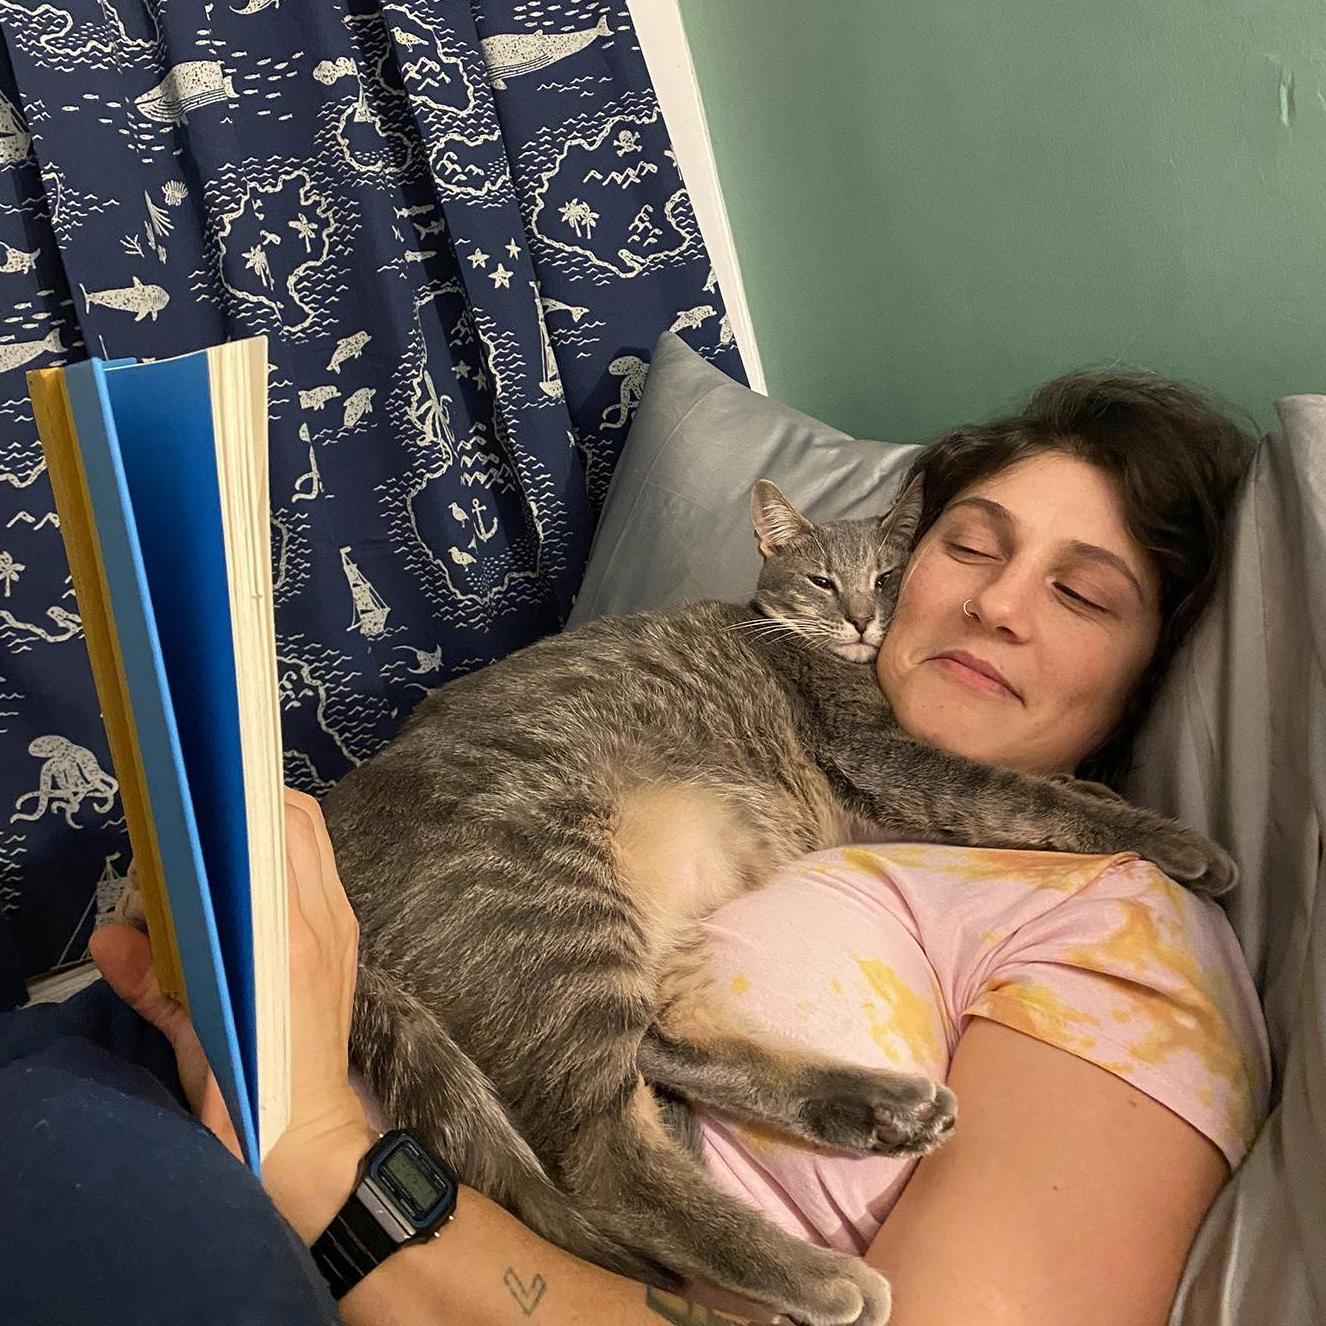 to say our cat Jerry favors Perry may or may not be an understatement... but this photo is pretty typical of most nights when we are reading in bed!